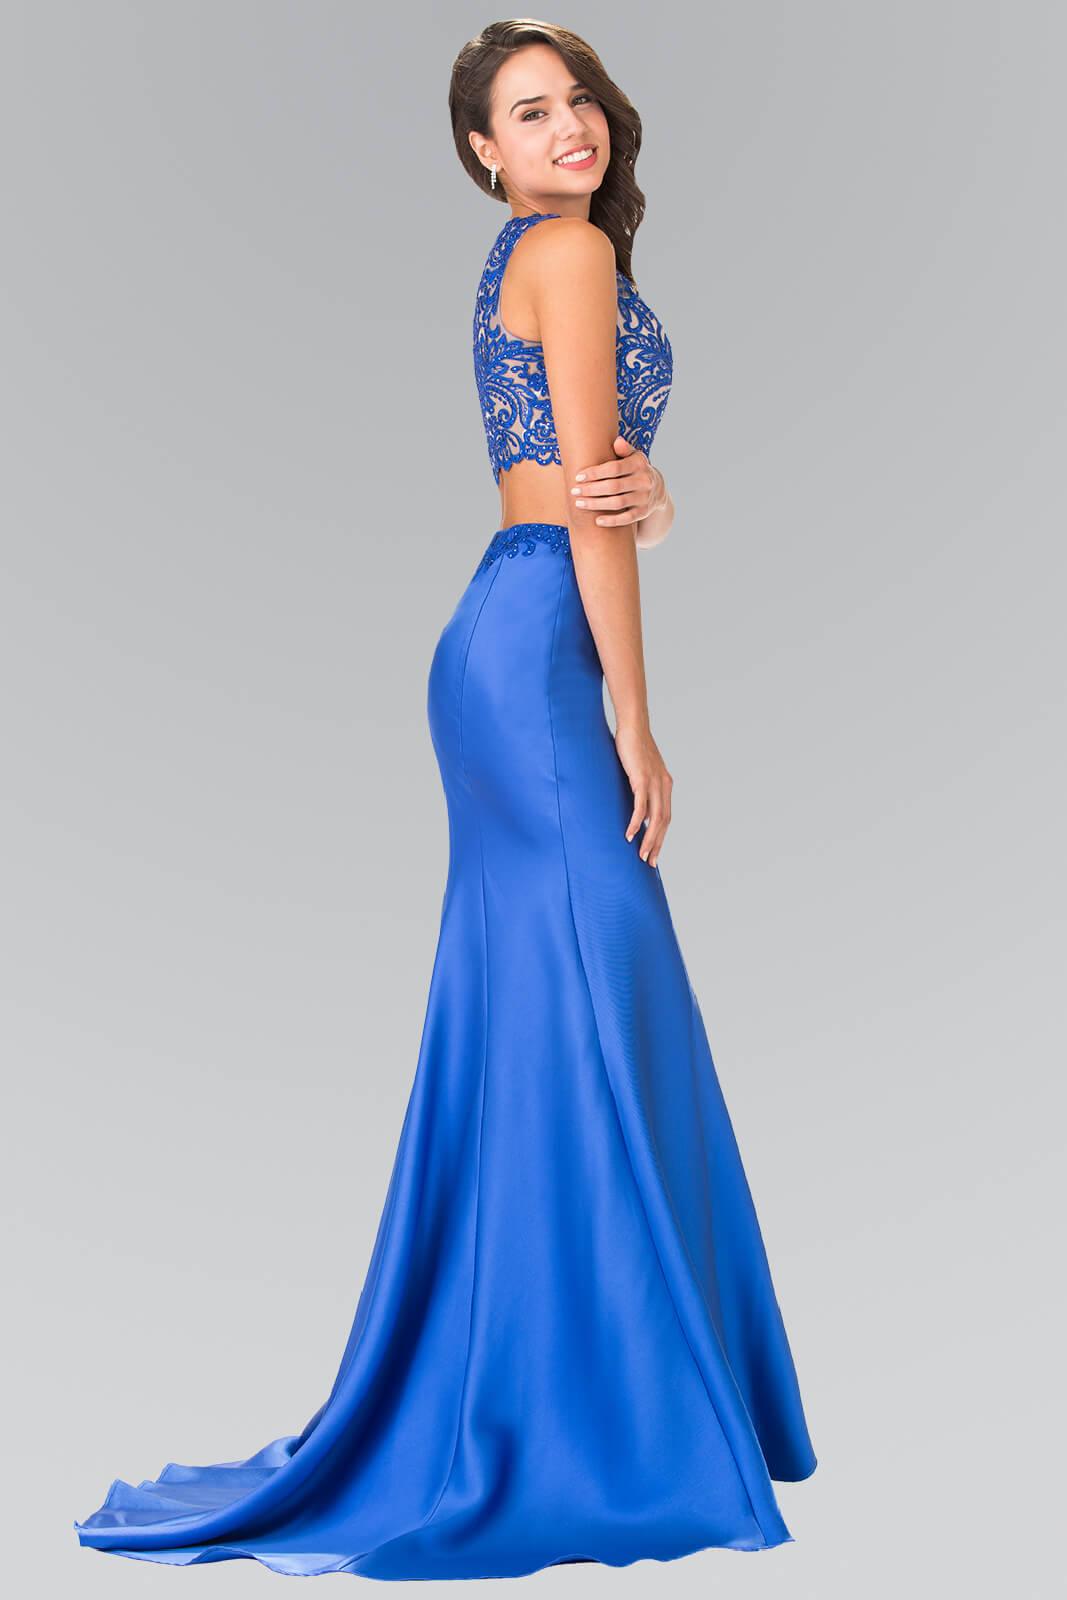 Prom 2 Piece Trumpet Homecoming Evening Long Gown - The Dress Outlet Elizabeth K